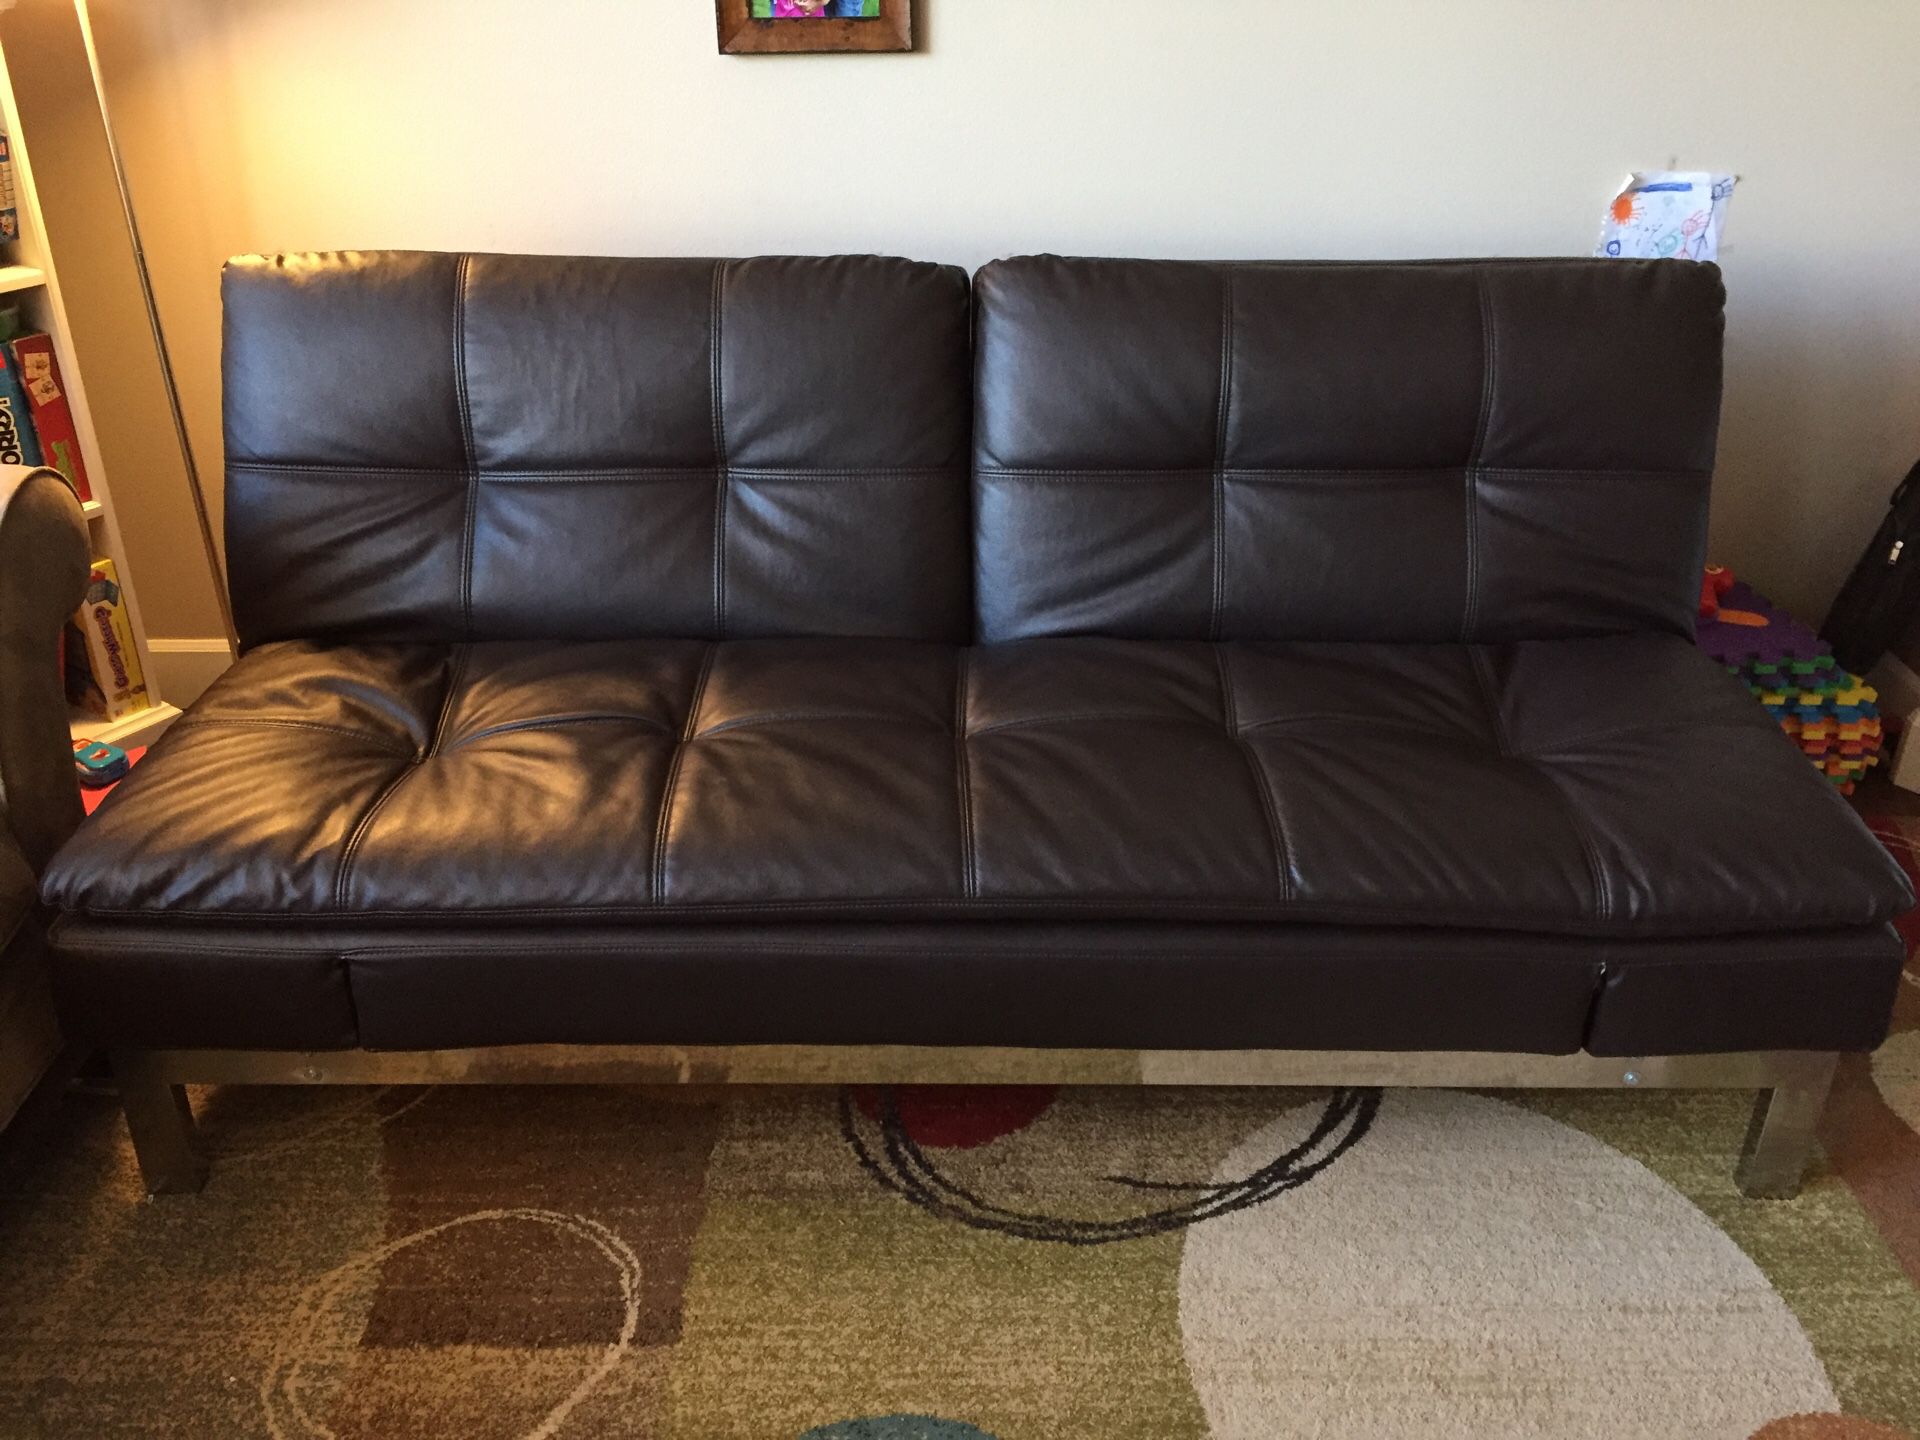 Leather Couch Can Turn into Full Size Bed / Futon